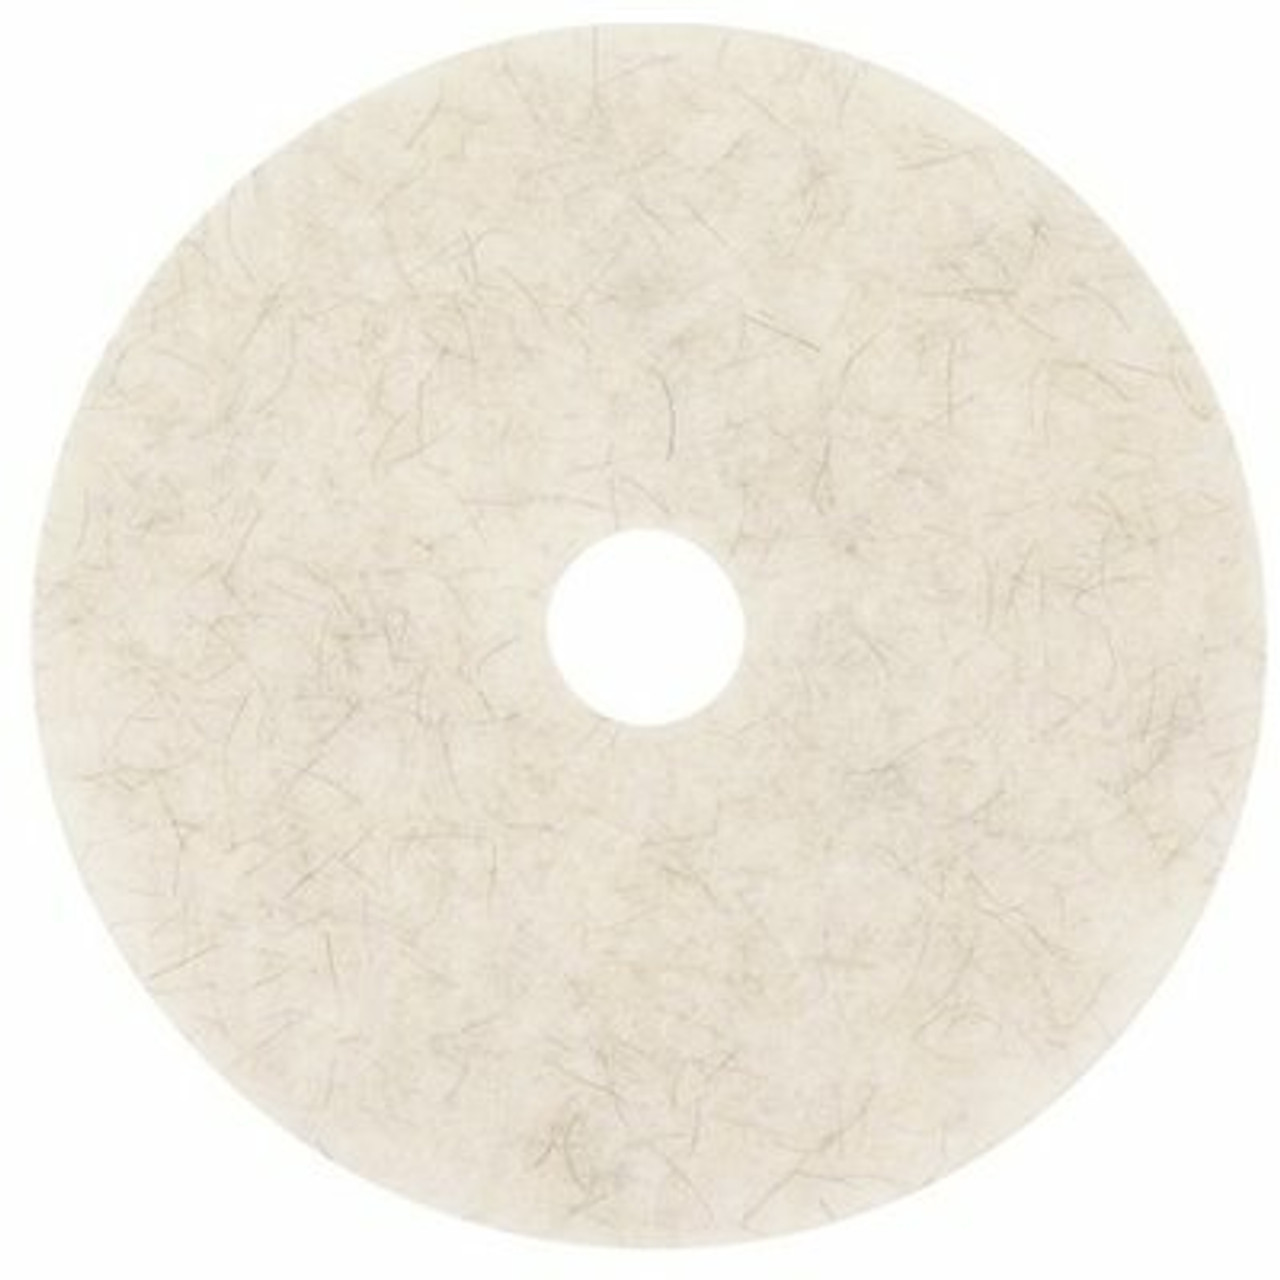 3M 20 In. Natural Blend White Floor Pad (5-Count)